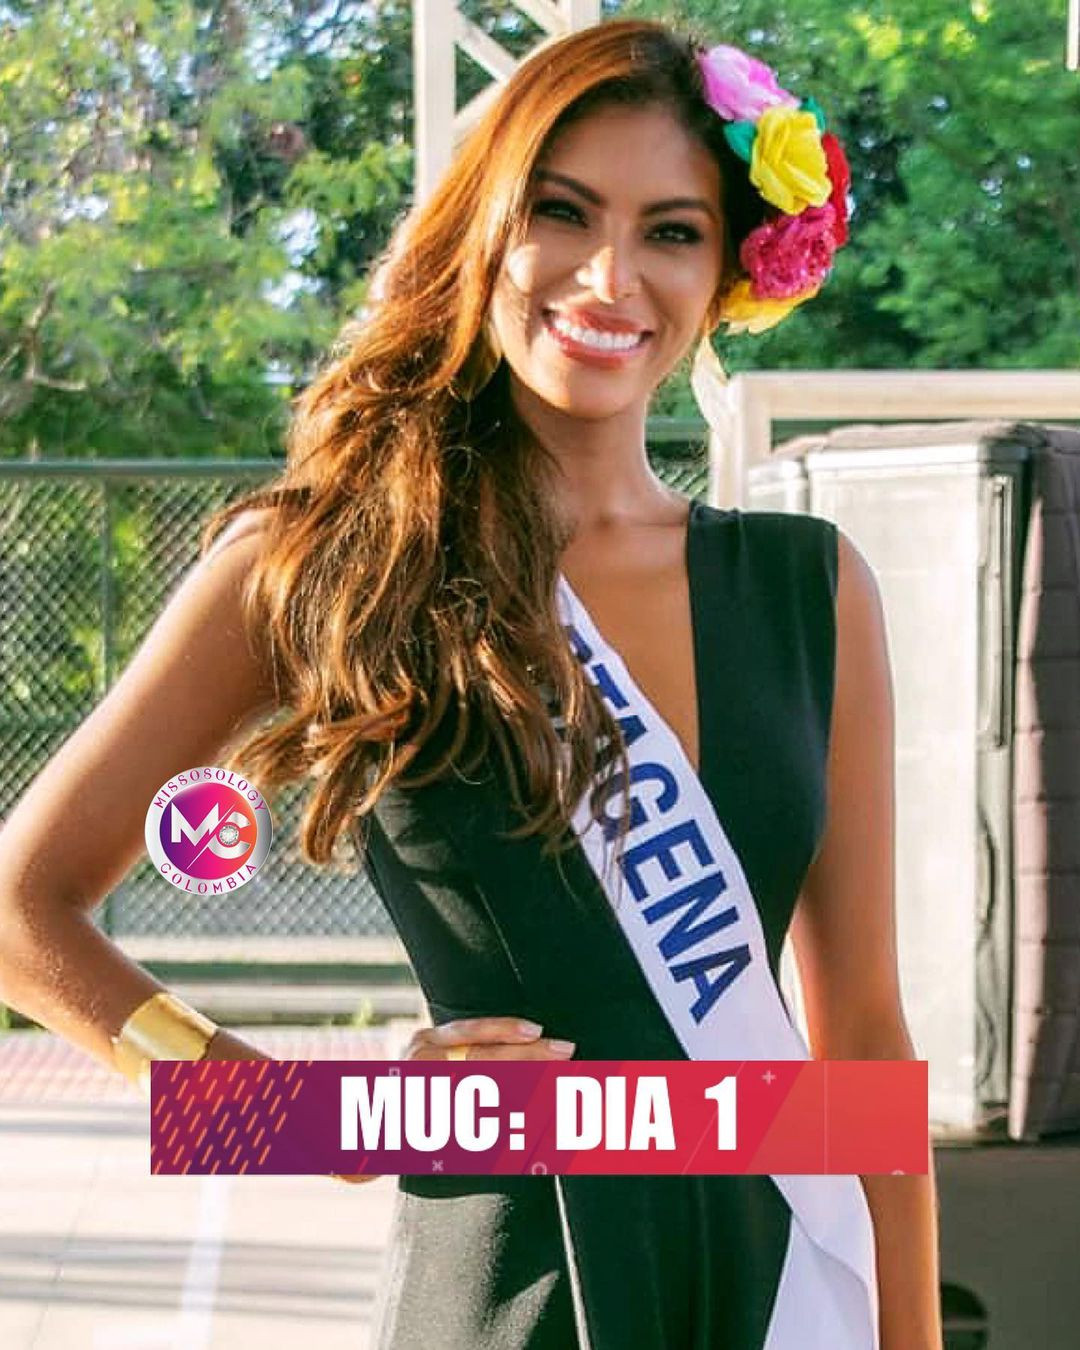 candidatas a miss universe colombia 2021. final: 18 oct. sede: neiva. - Página 8 52rjFn